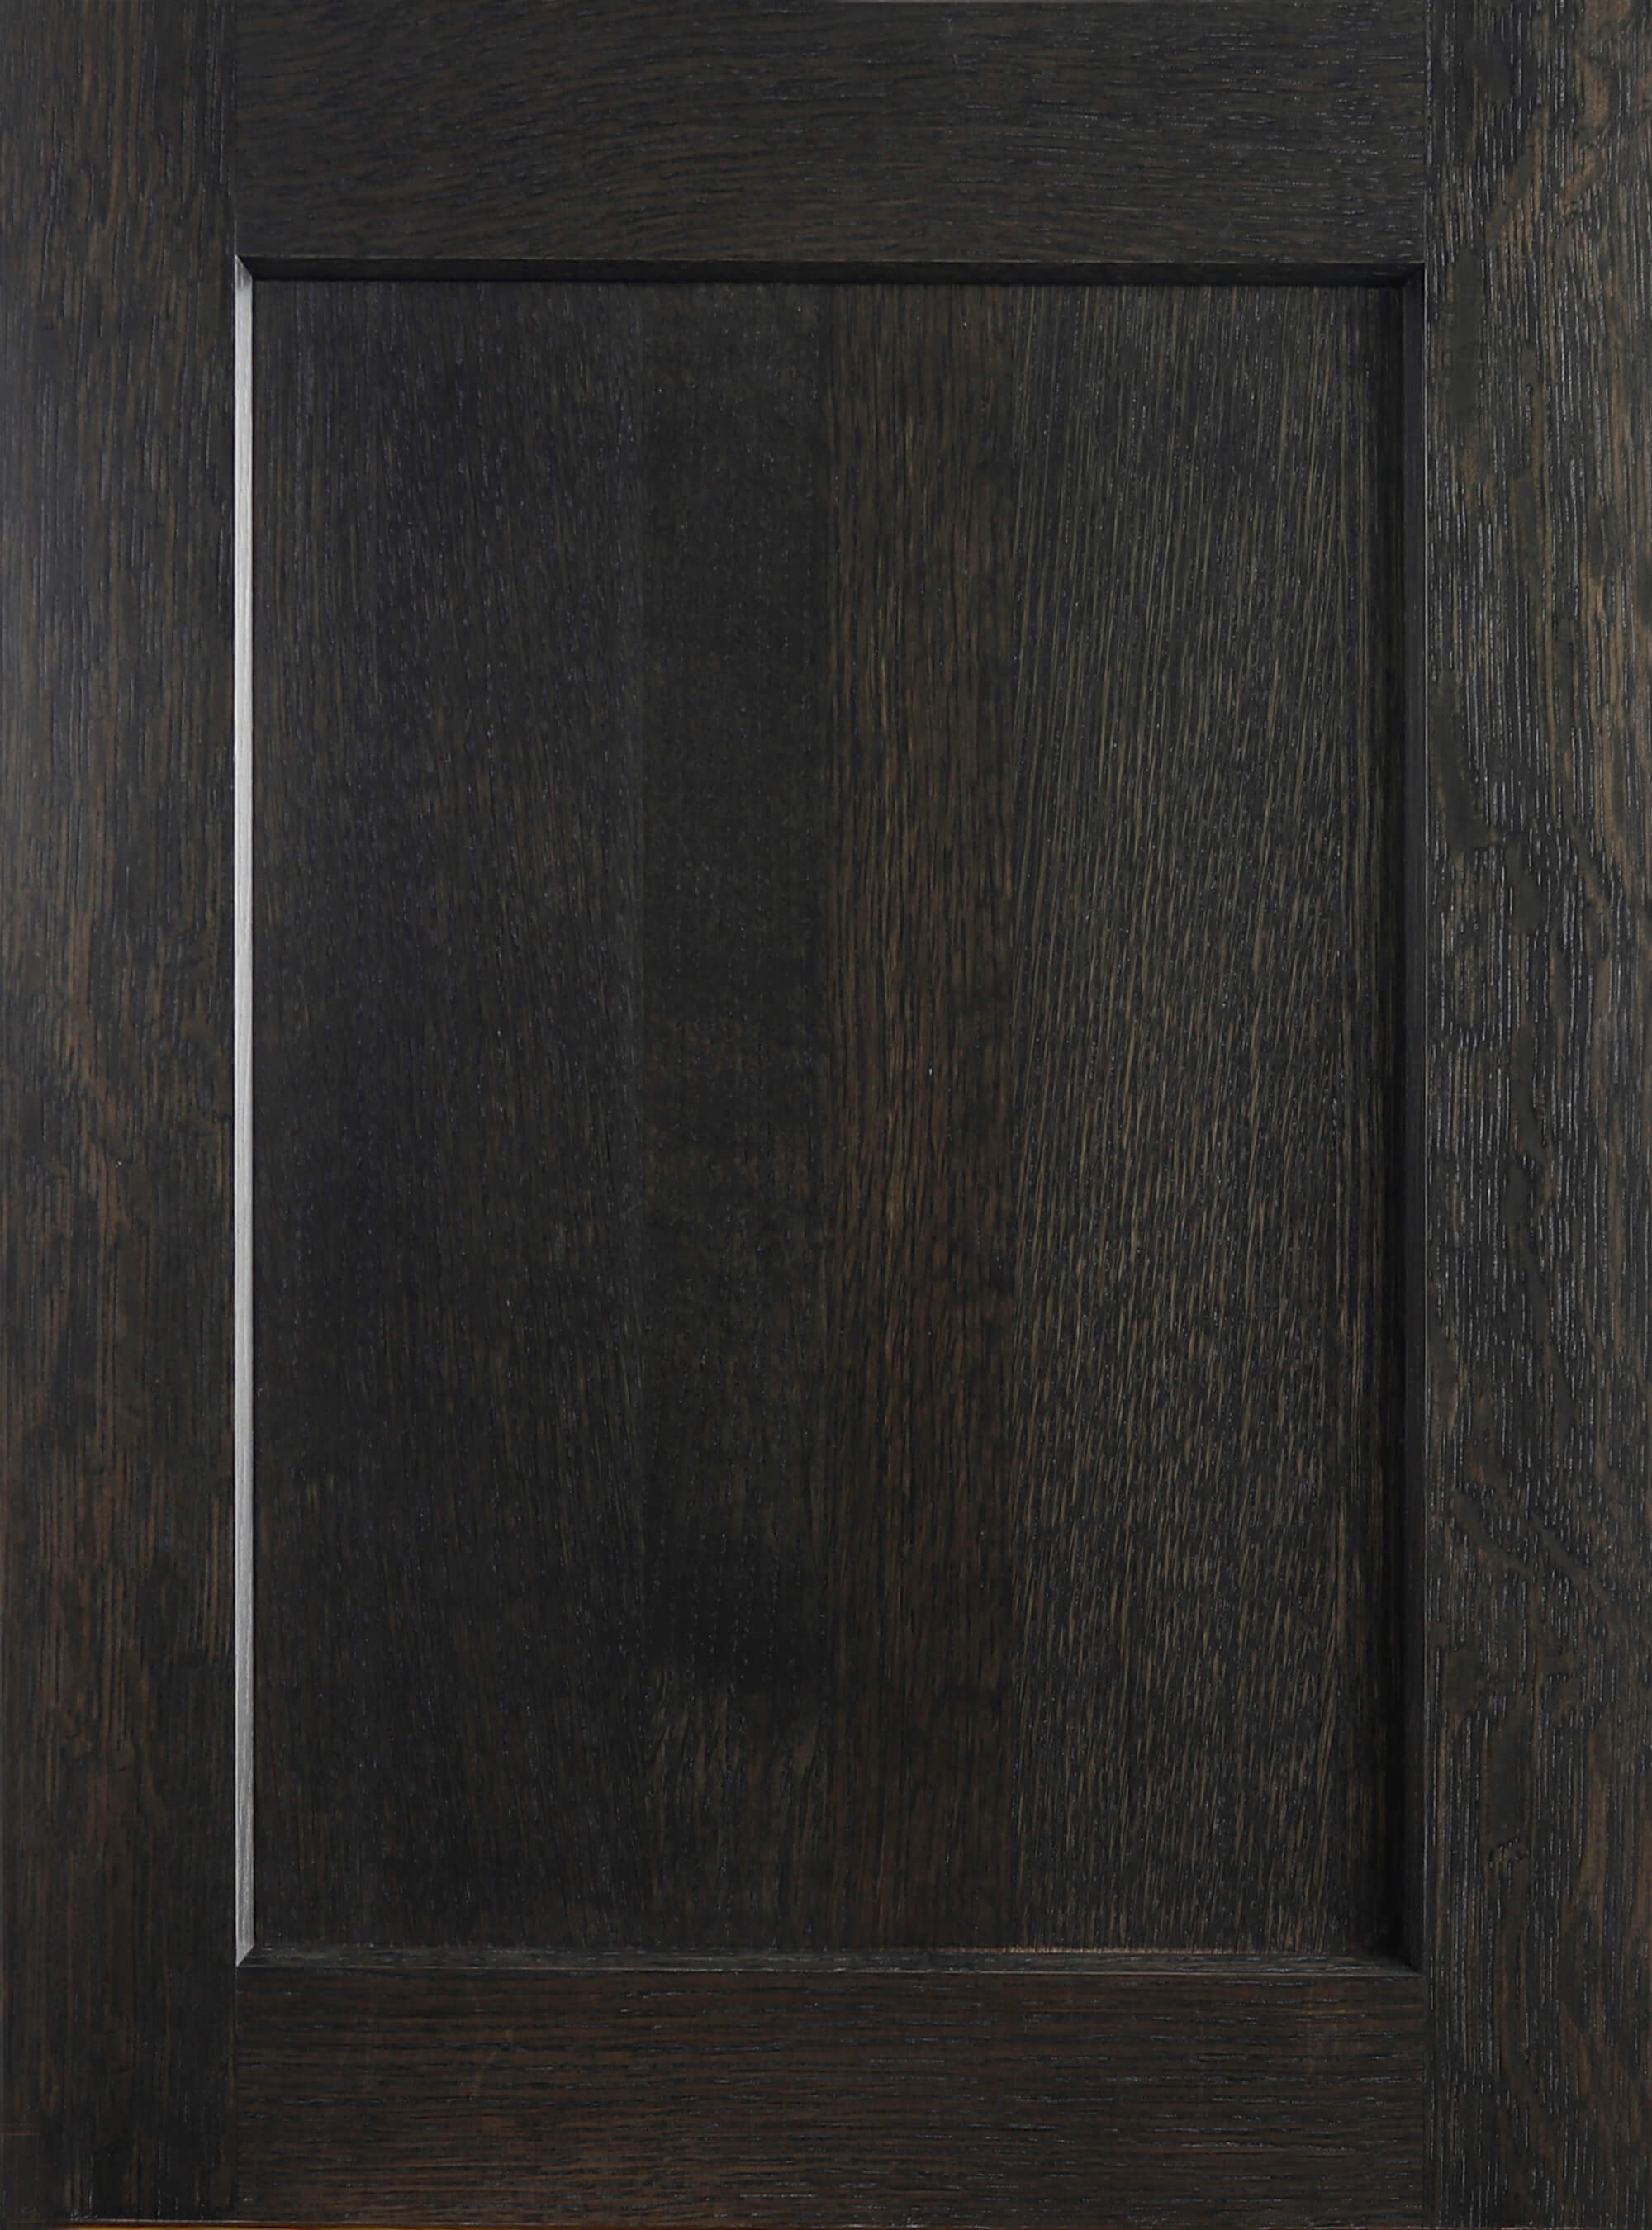 An almost black stained shaker cabinet door with Quarter-Sawn White Oak wood.